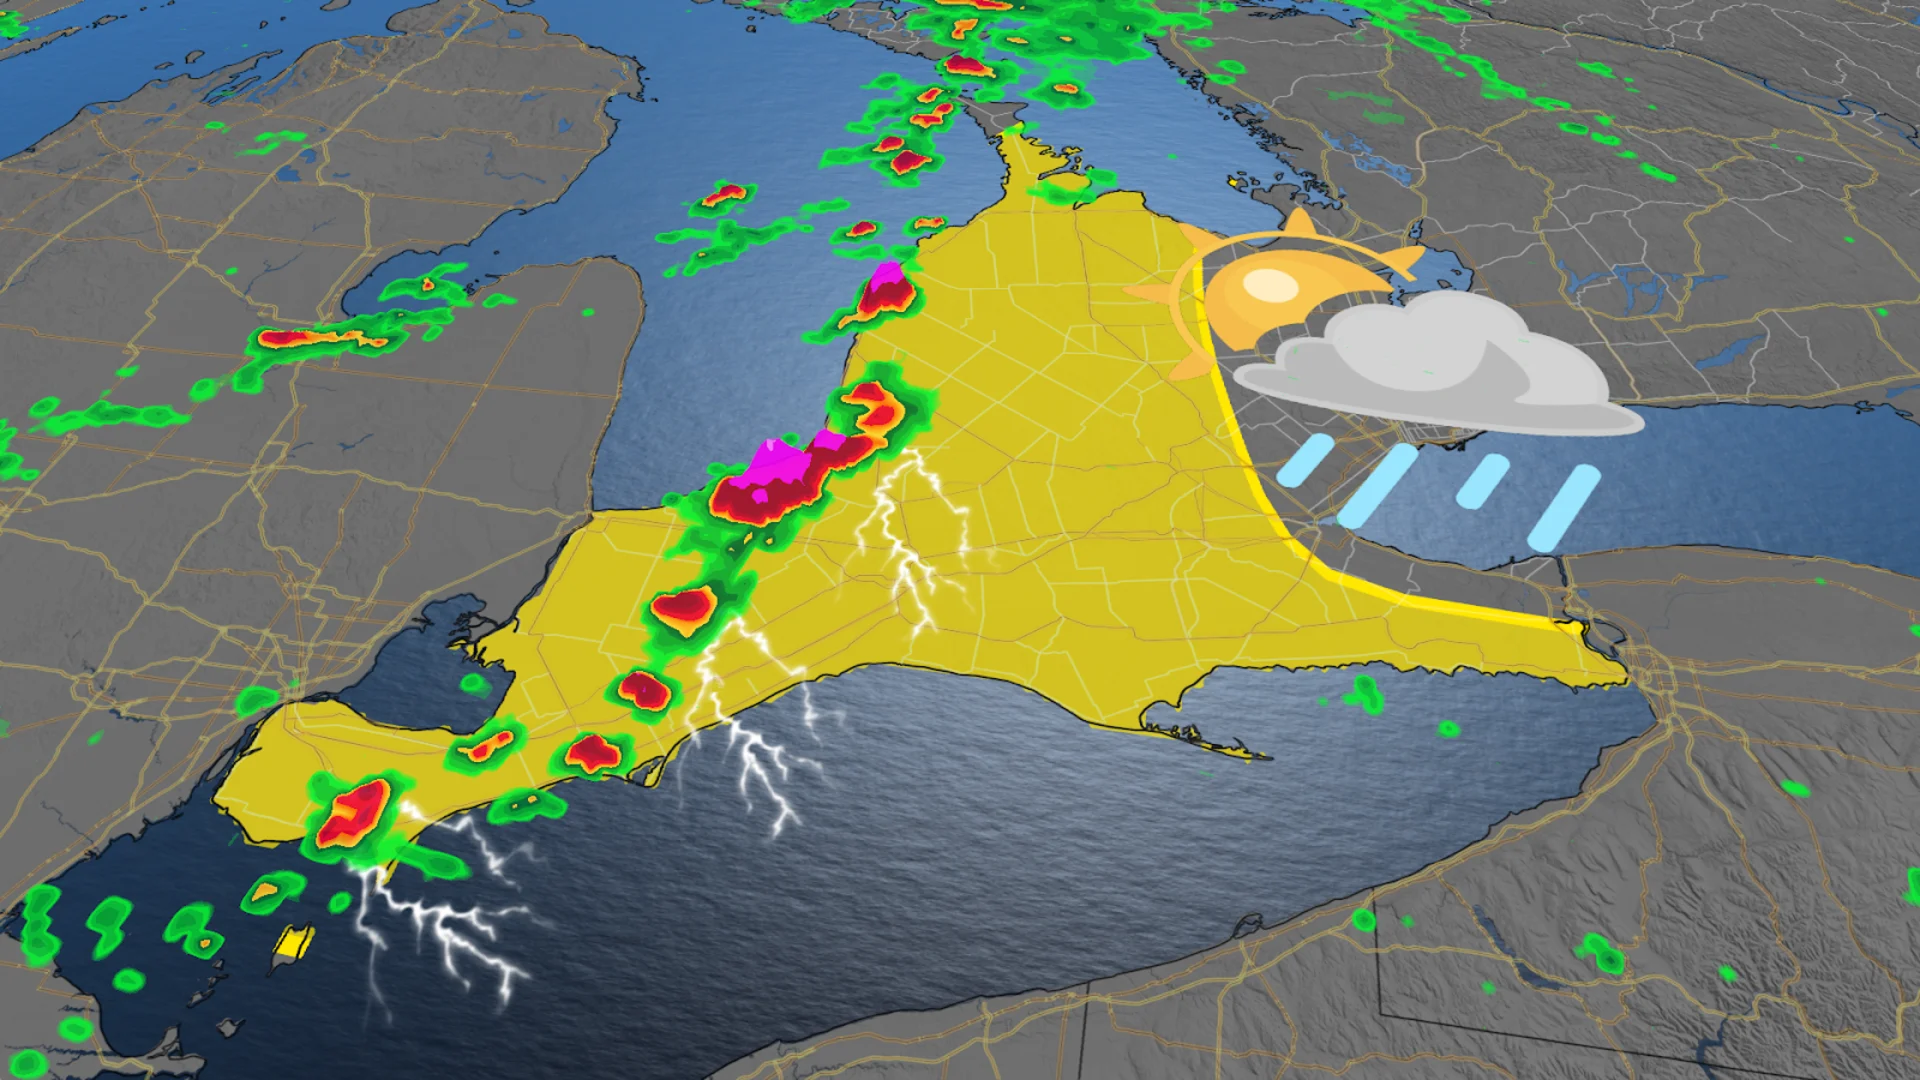 The month may be coming to an end, but April has a couple more showers in store for southern Ontario before seeing May flowers. See the forecast, here